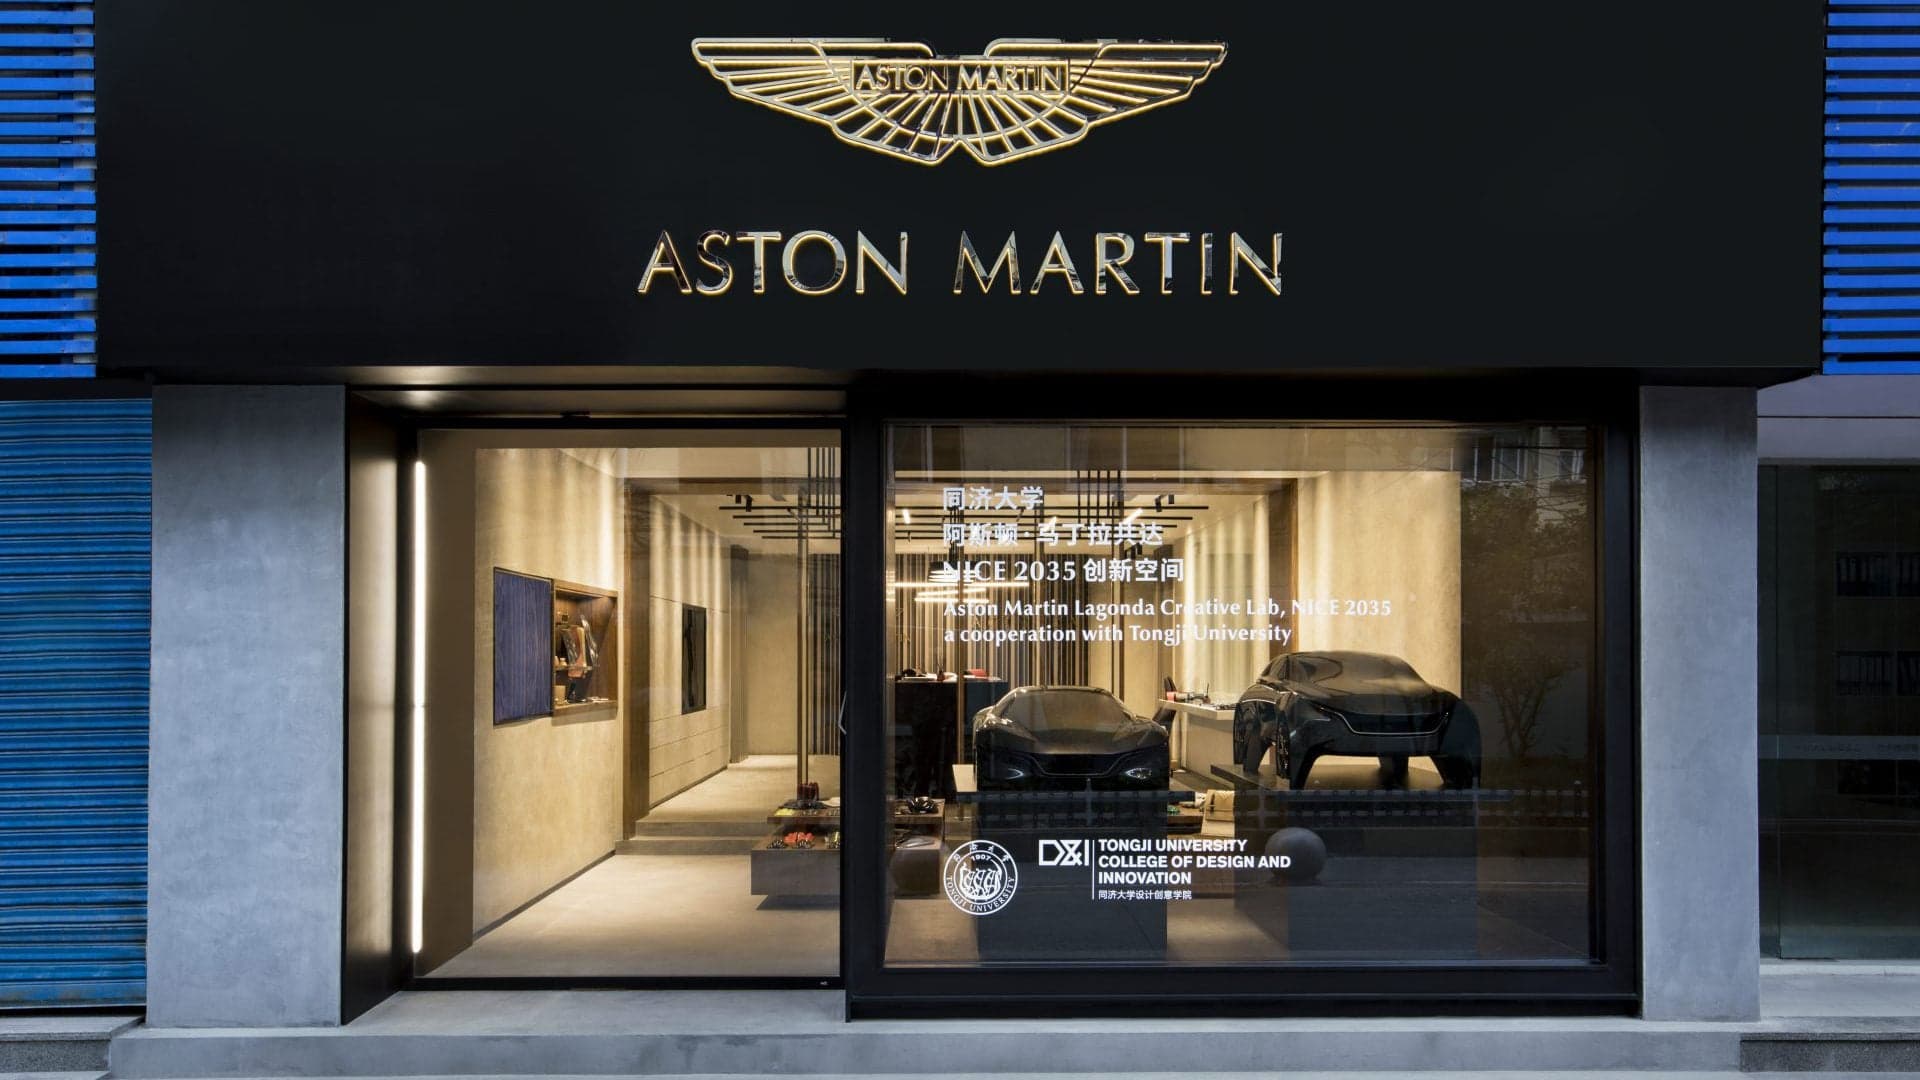 Aston Martin Might Be Purchased by Billionaire Lawrence Stroll: Report